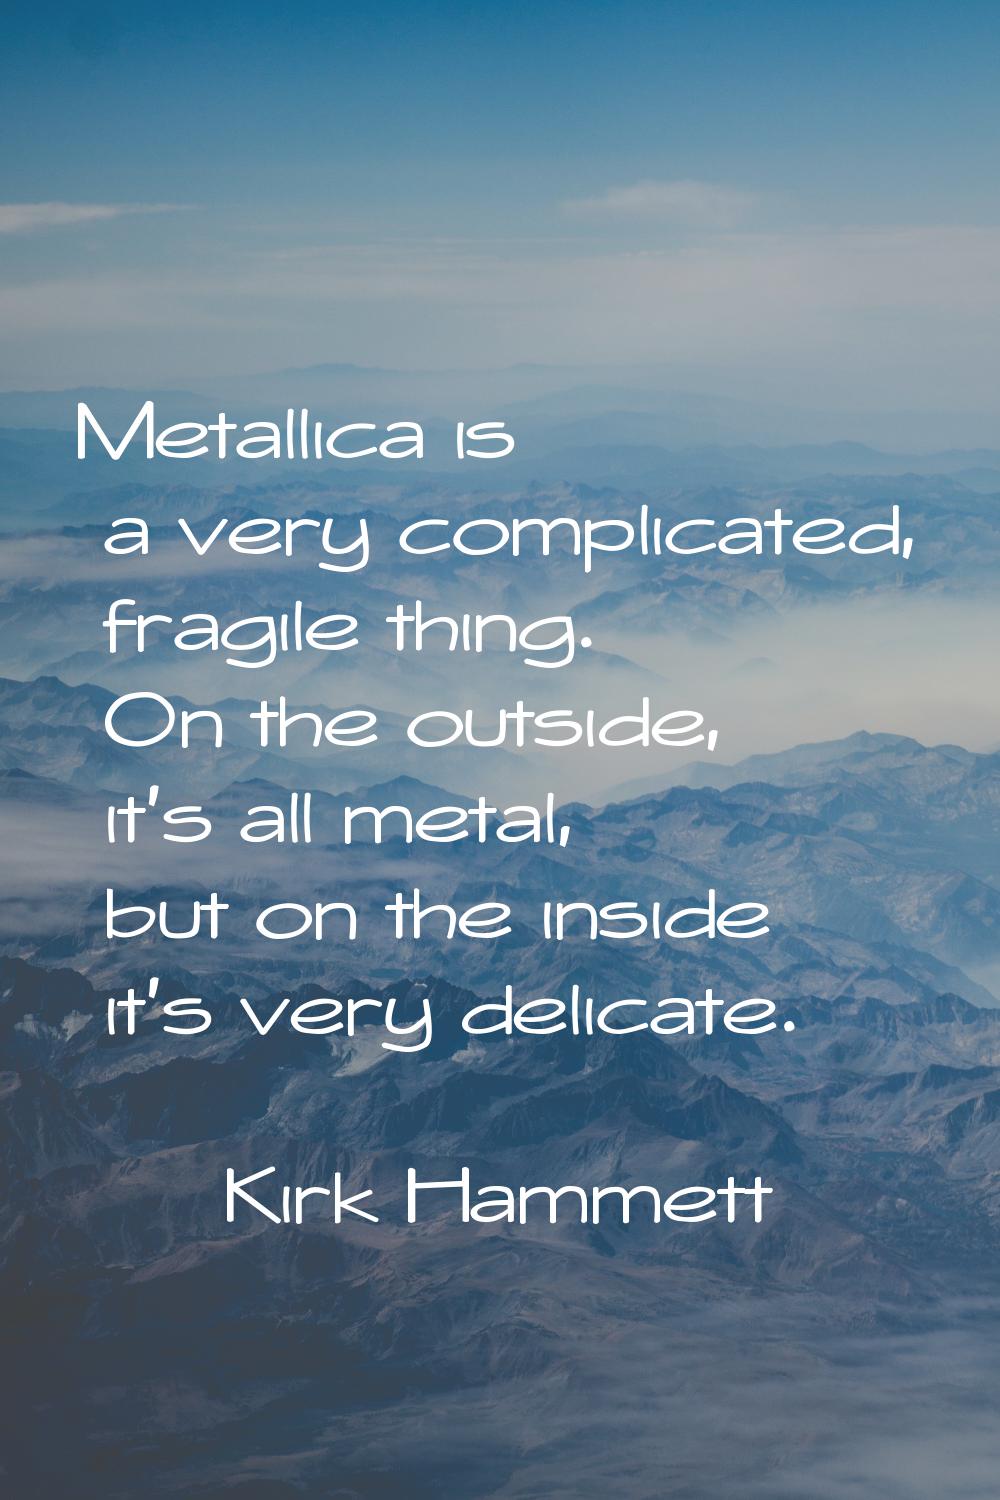 Metallica is a very complicated, fragile thing. On the outside, it's all metal, but on the inside i